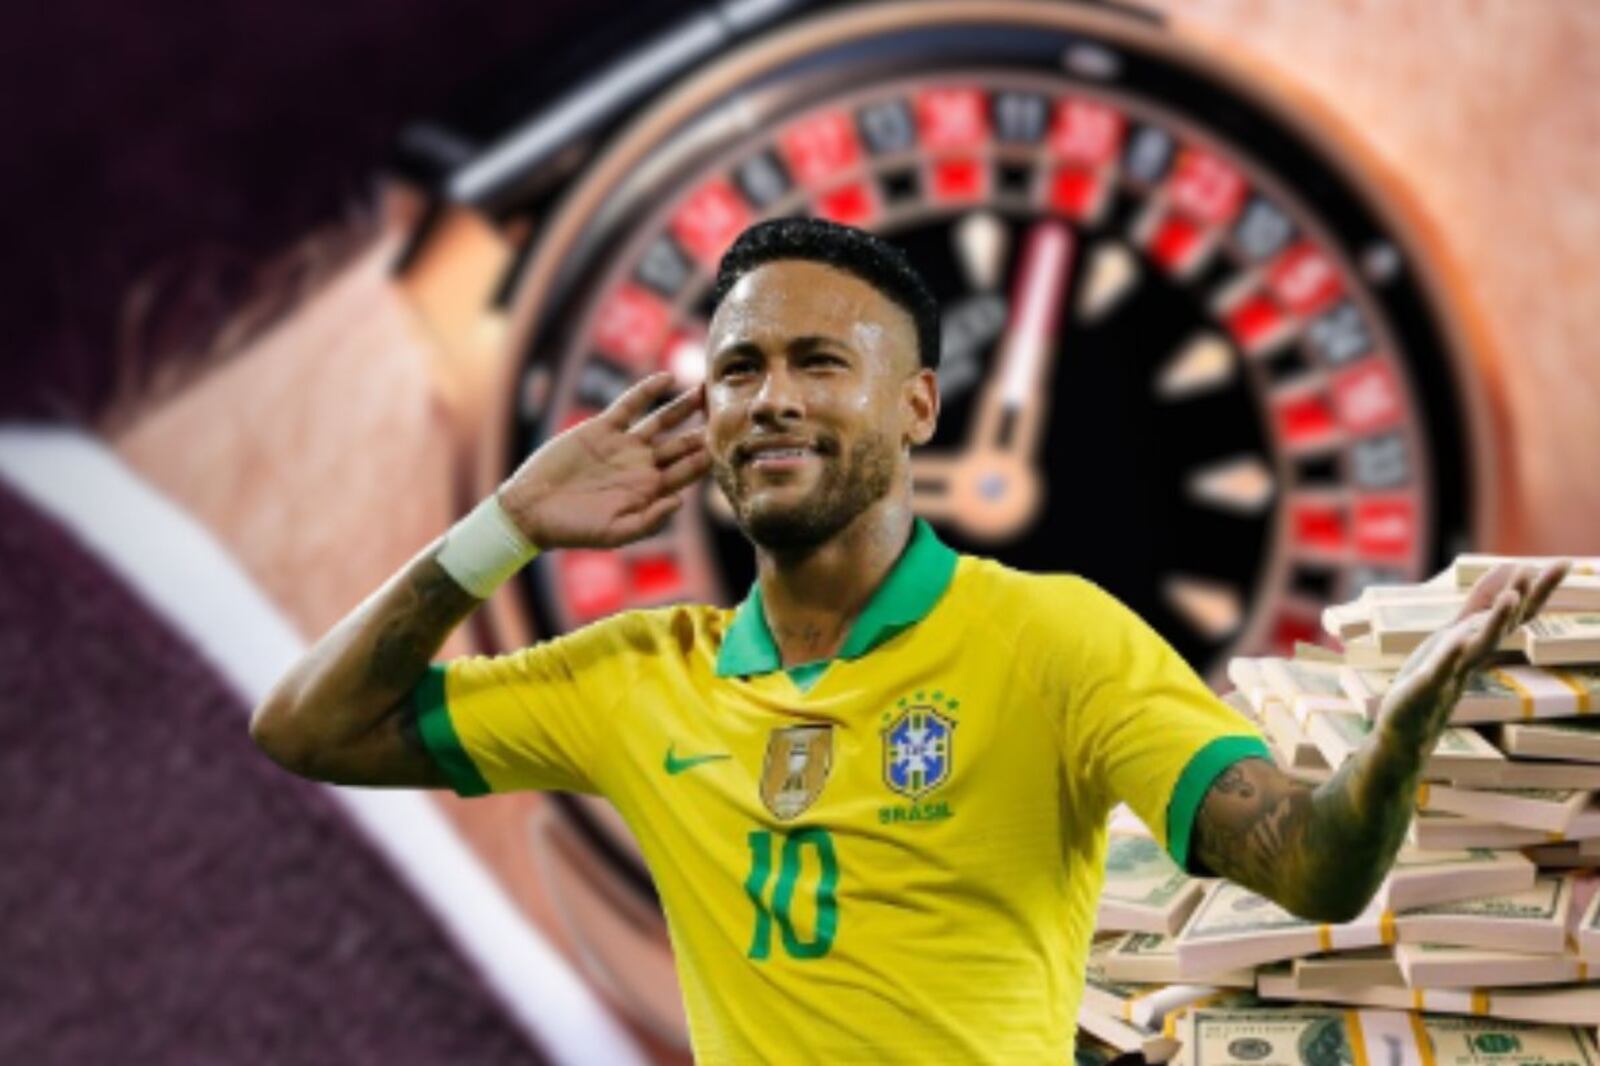 He still out of soccer, but the exclusive watch of Neymar with which he plays Roulette, its millionaire cost